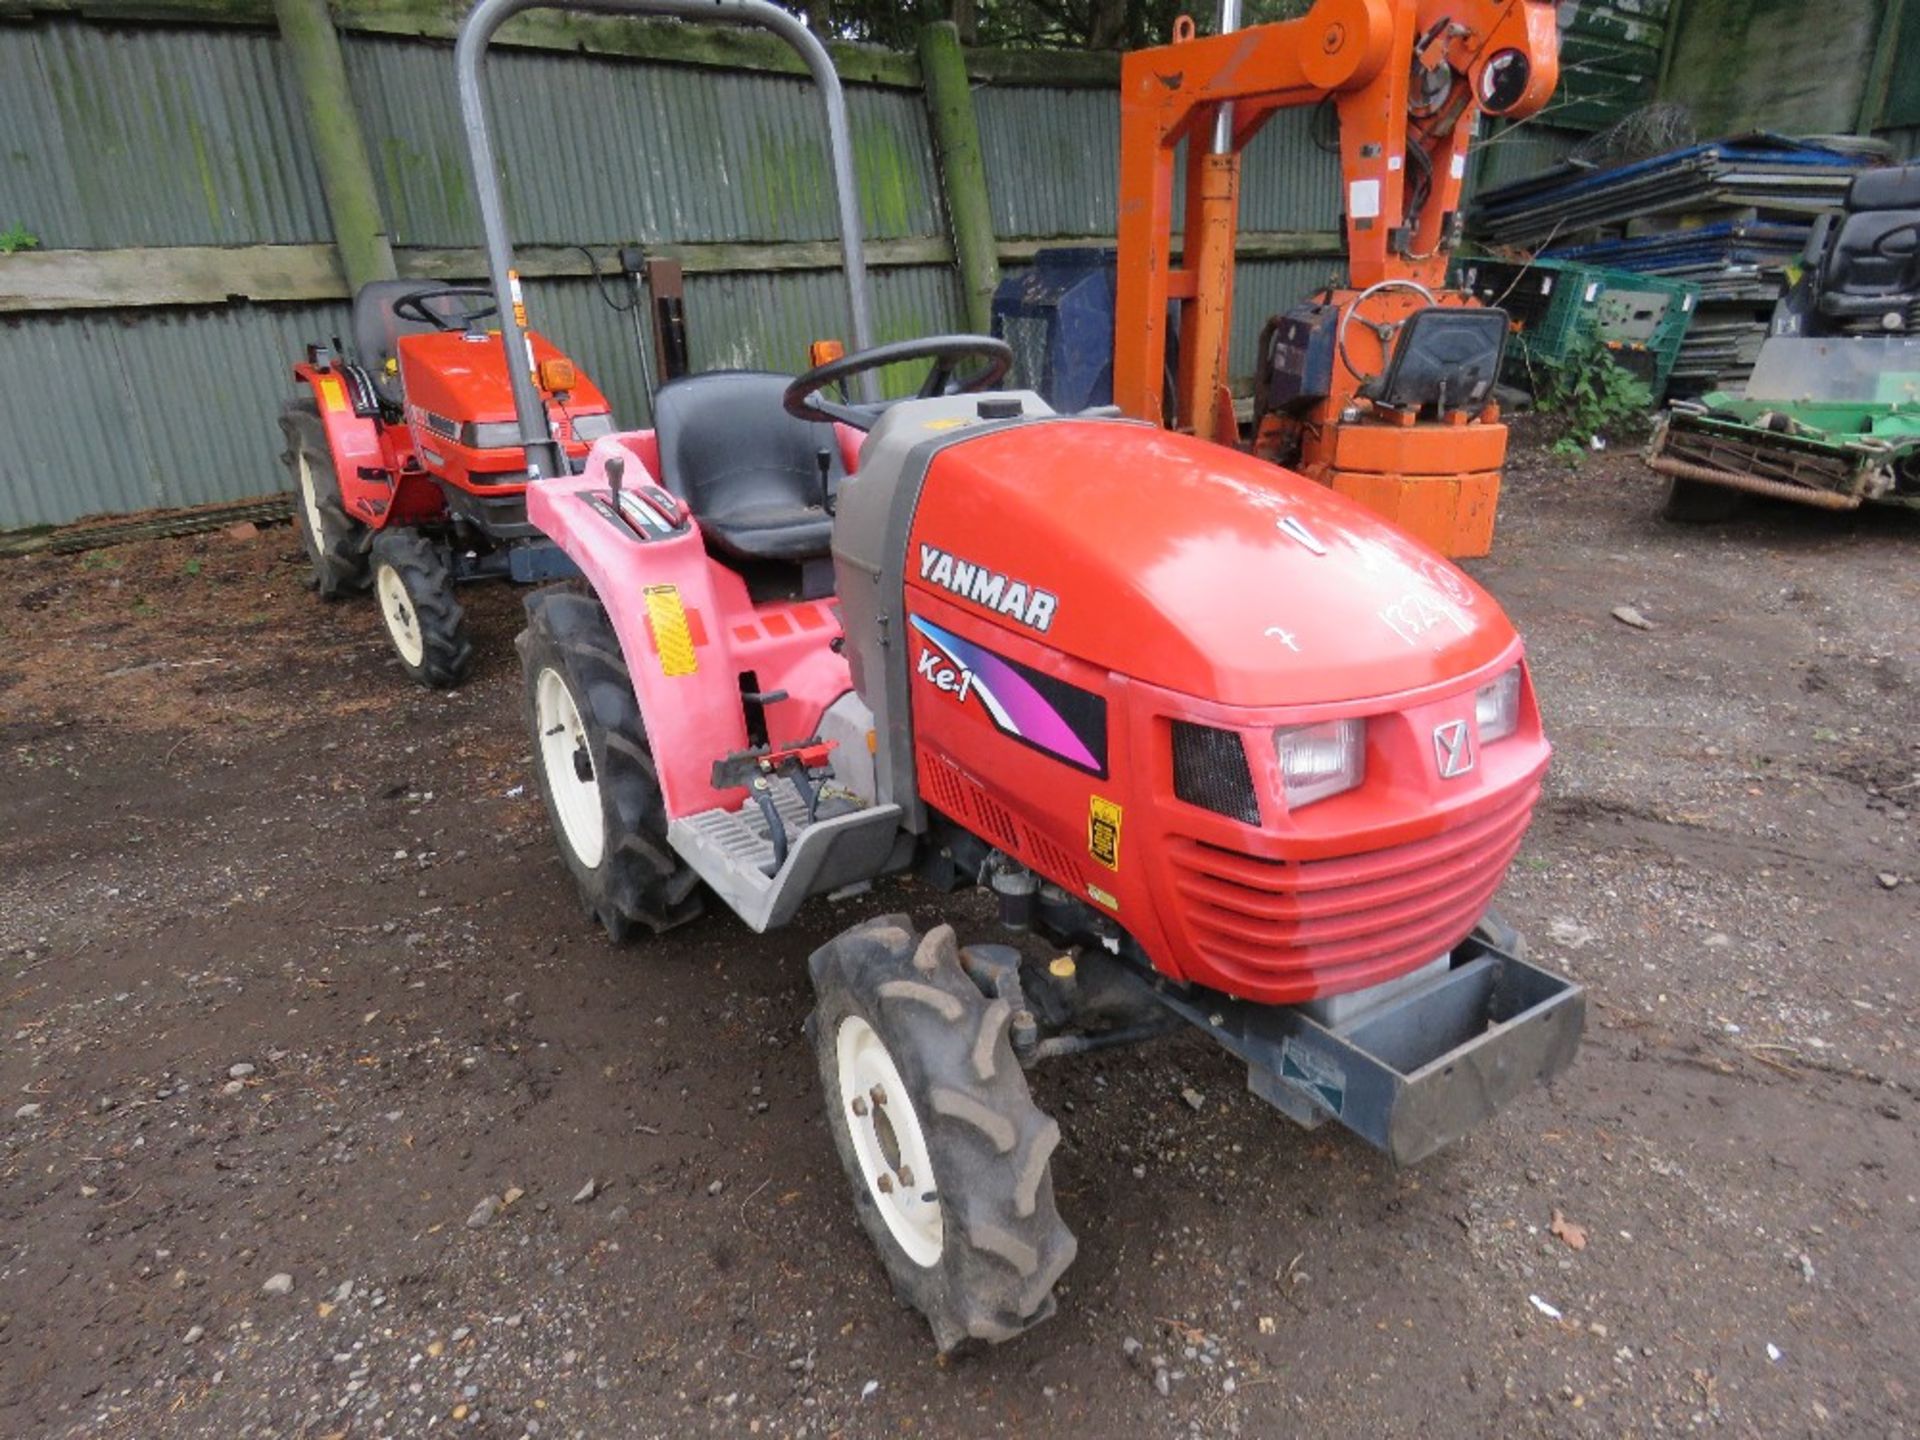 YANMAR KE1 4WD COMPACT TRACTOR WITH REAR LINKAGE. 475 RE HRS. WHEN TESTED WAS SEEN TO RUN, DRIVE, PT